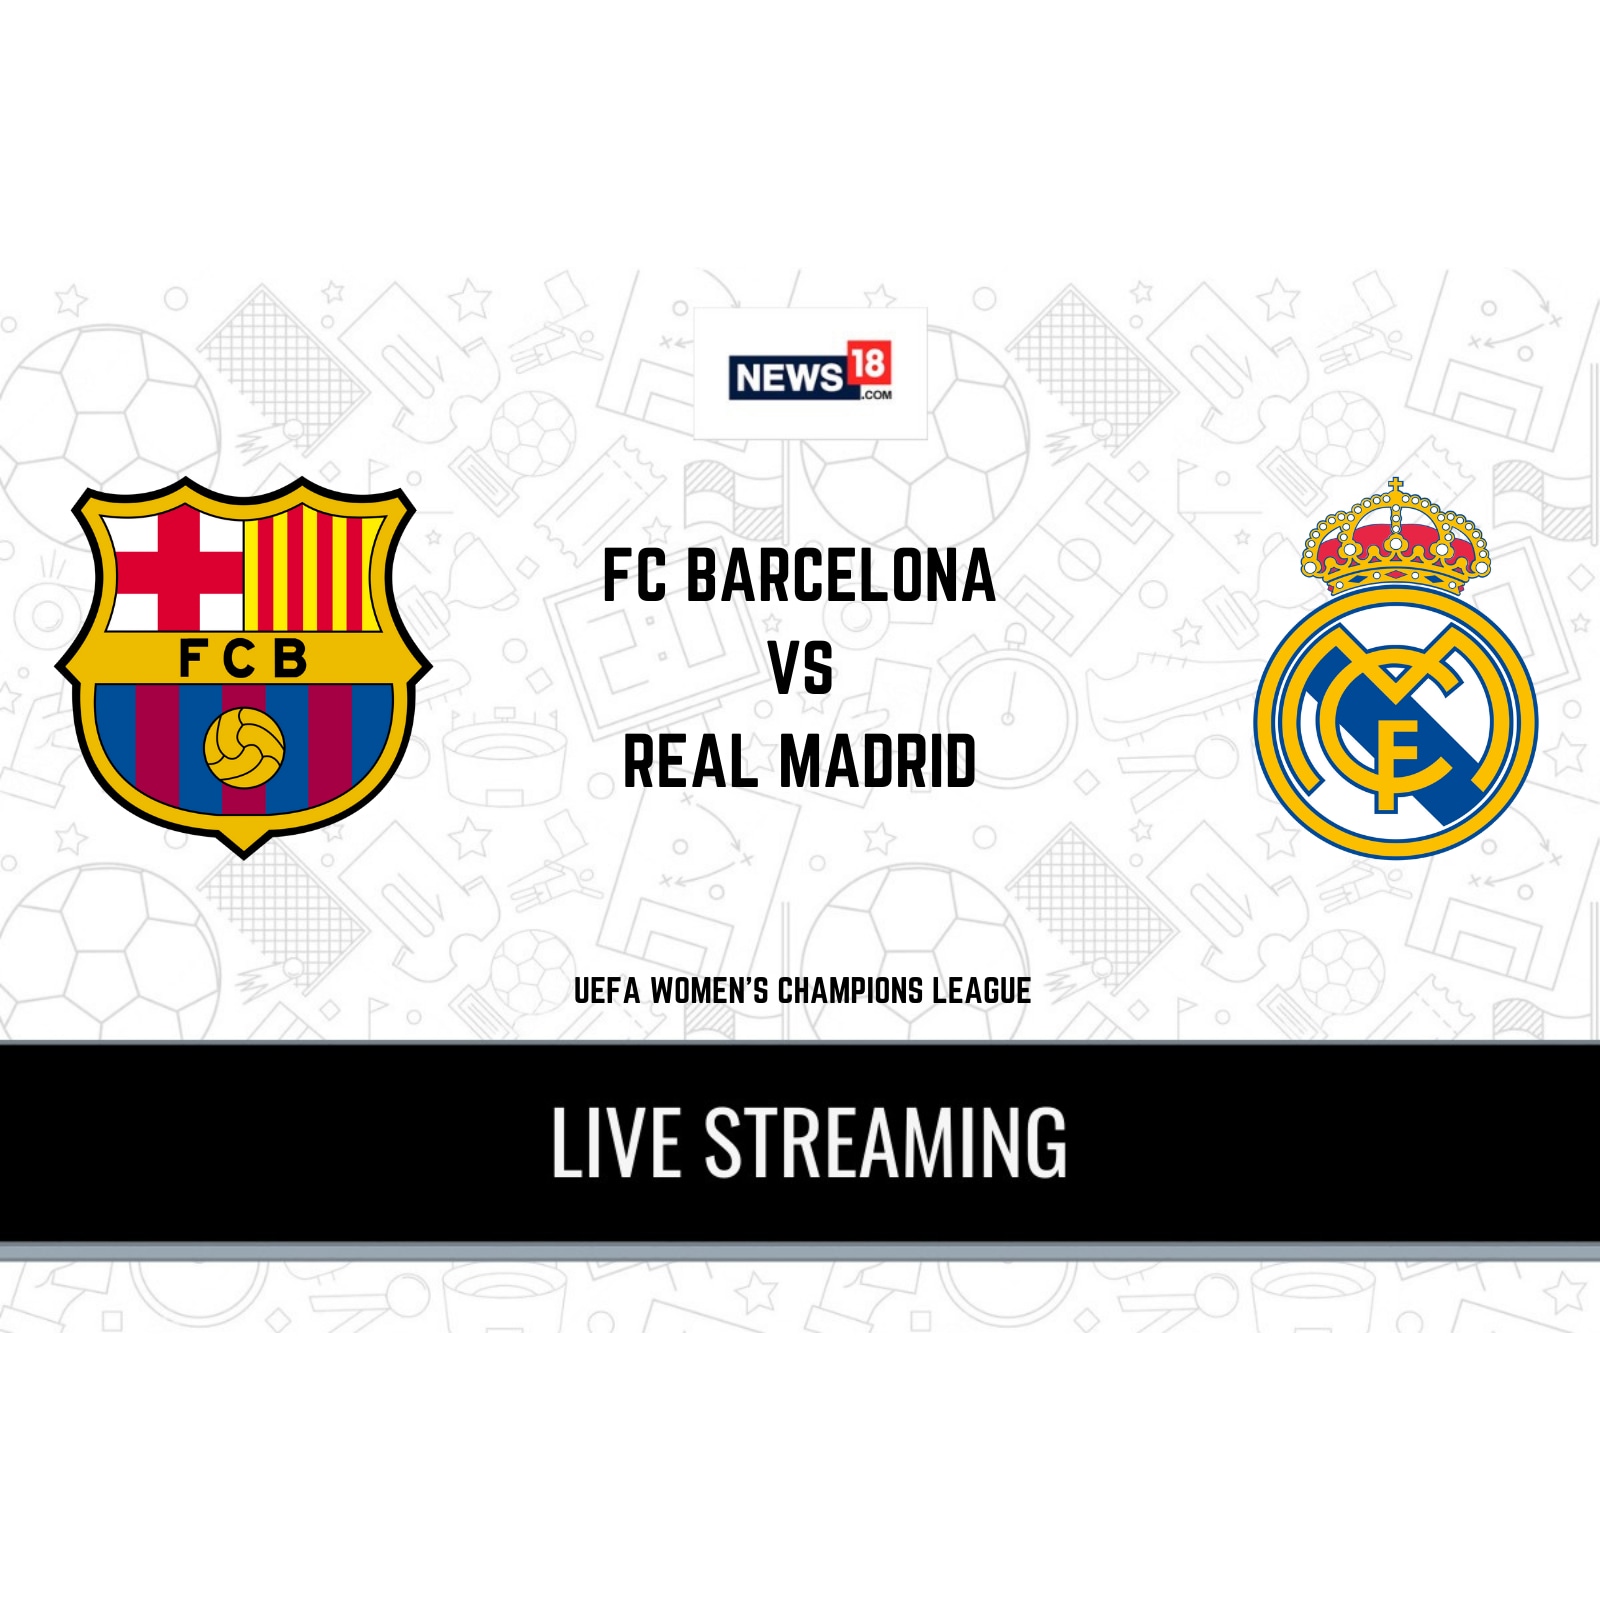 Uefa Women S Champions League 21 22 Barcelona Vs Real Madrid Live Streaming When And Where To Watch Online Tv Telecast Team News